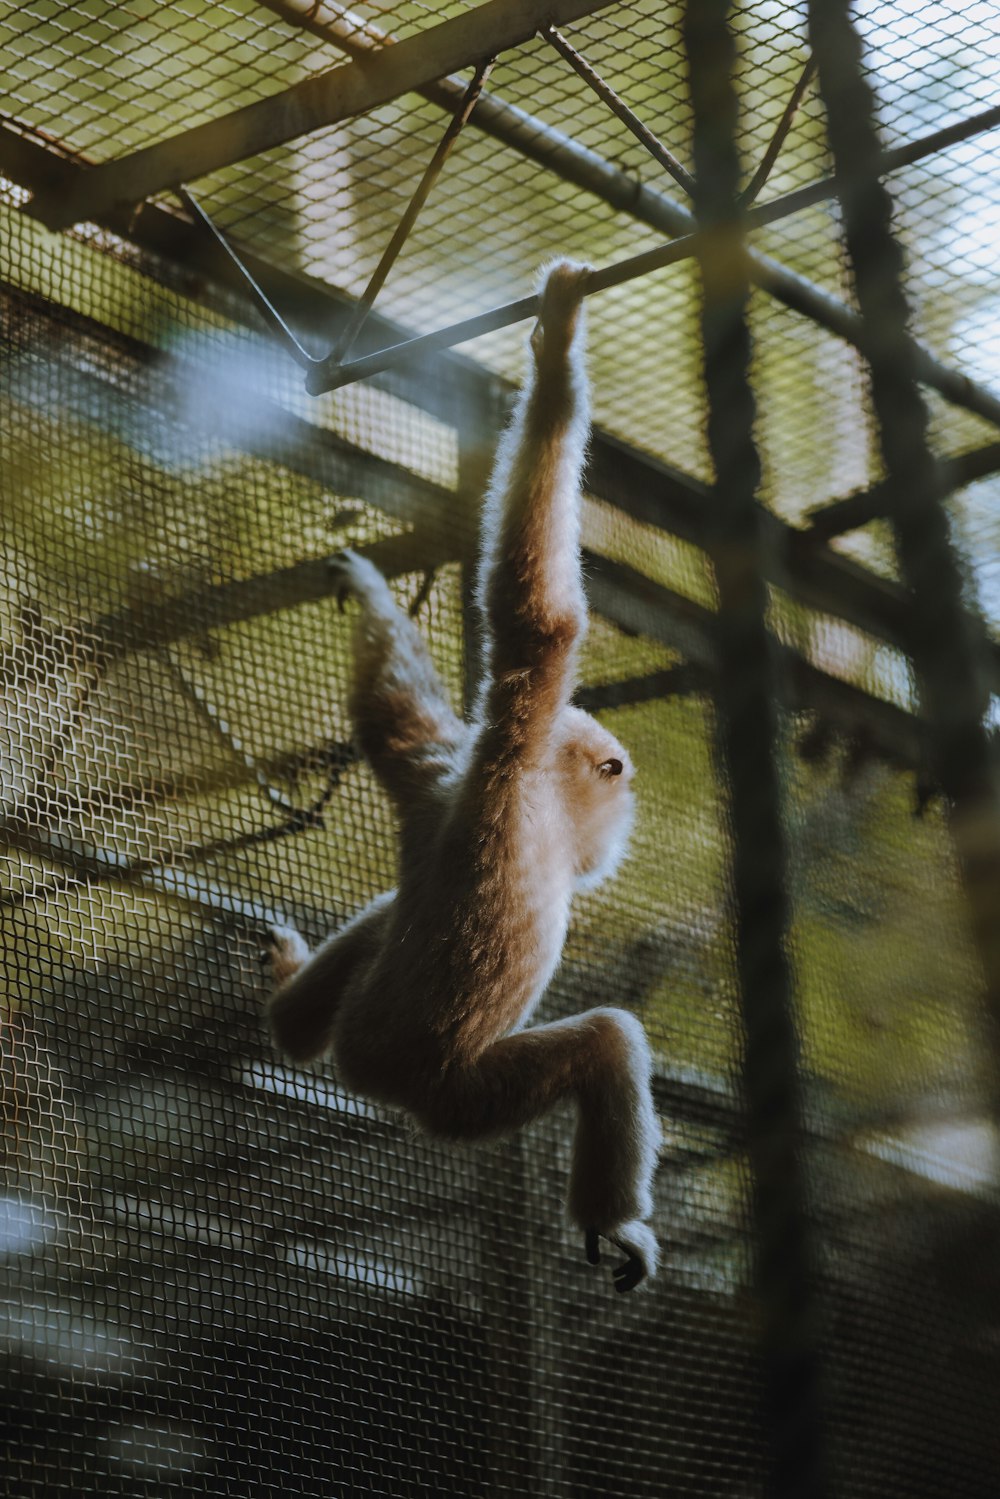 a monkey hanging upside down in a cage